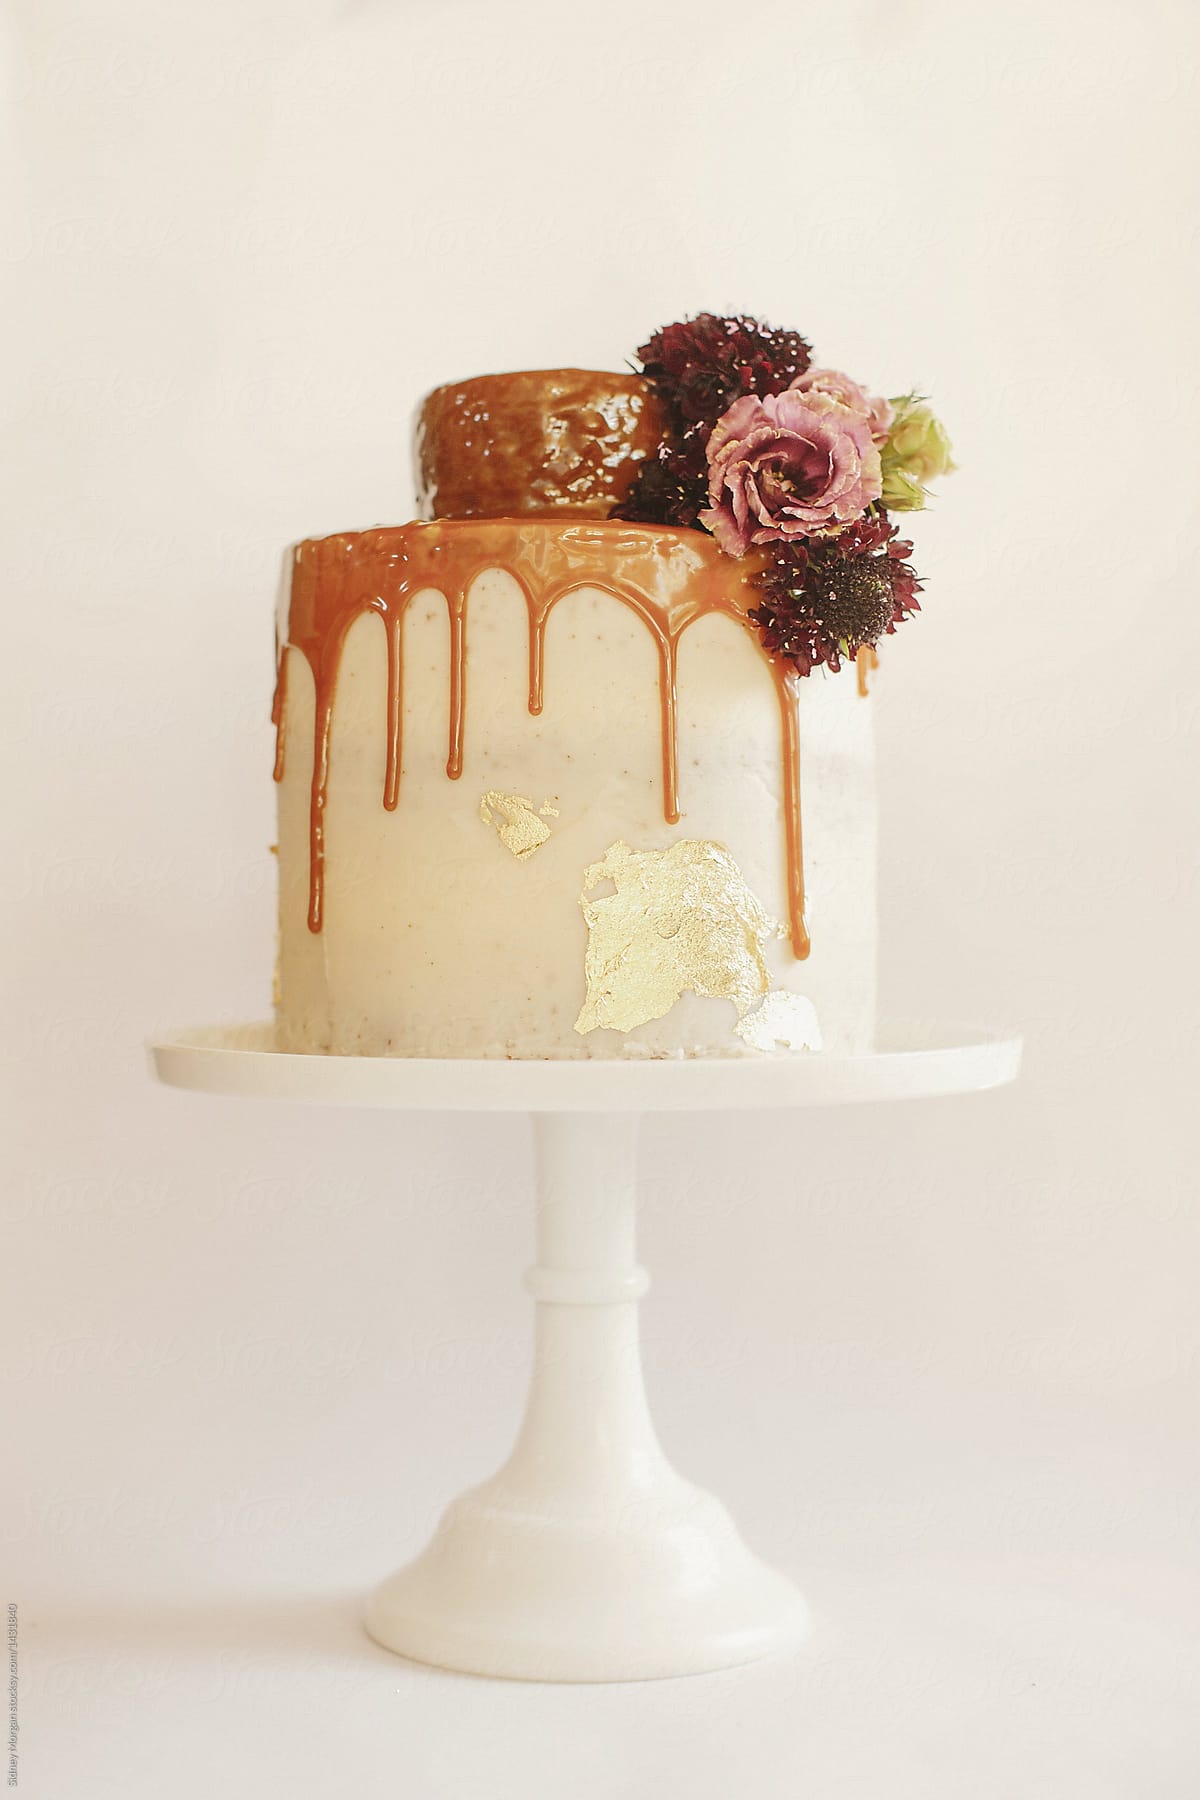 Buttercream and Caramel Wedding Cake with Flowers